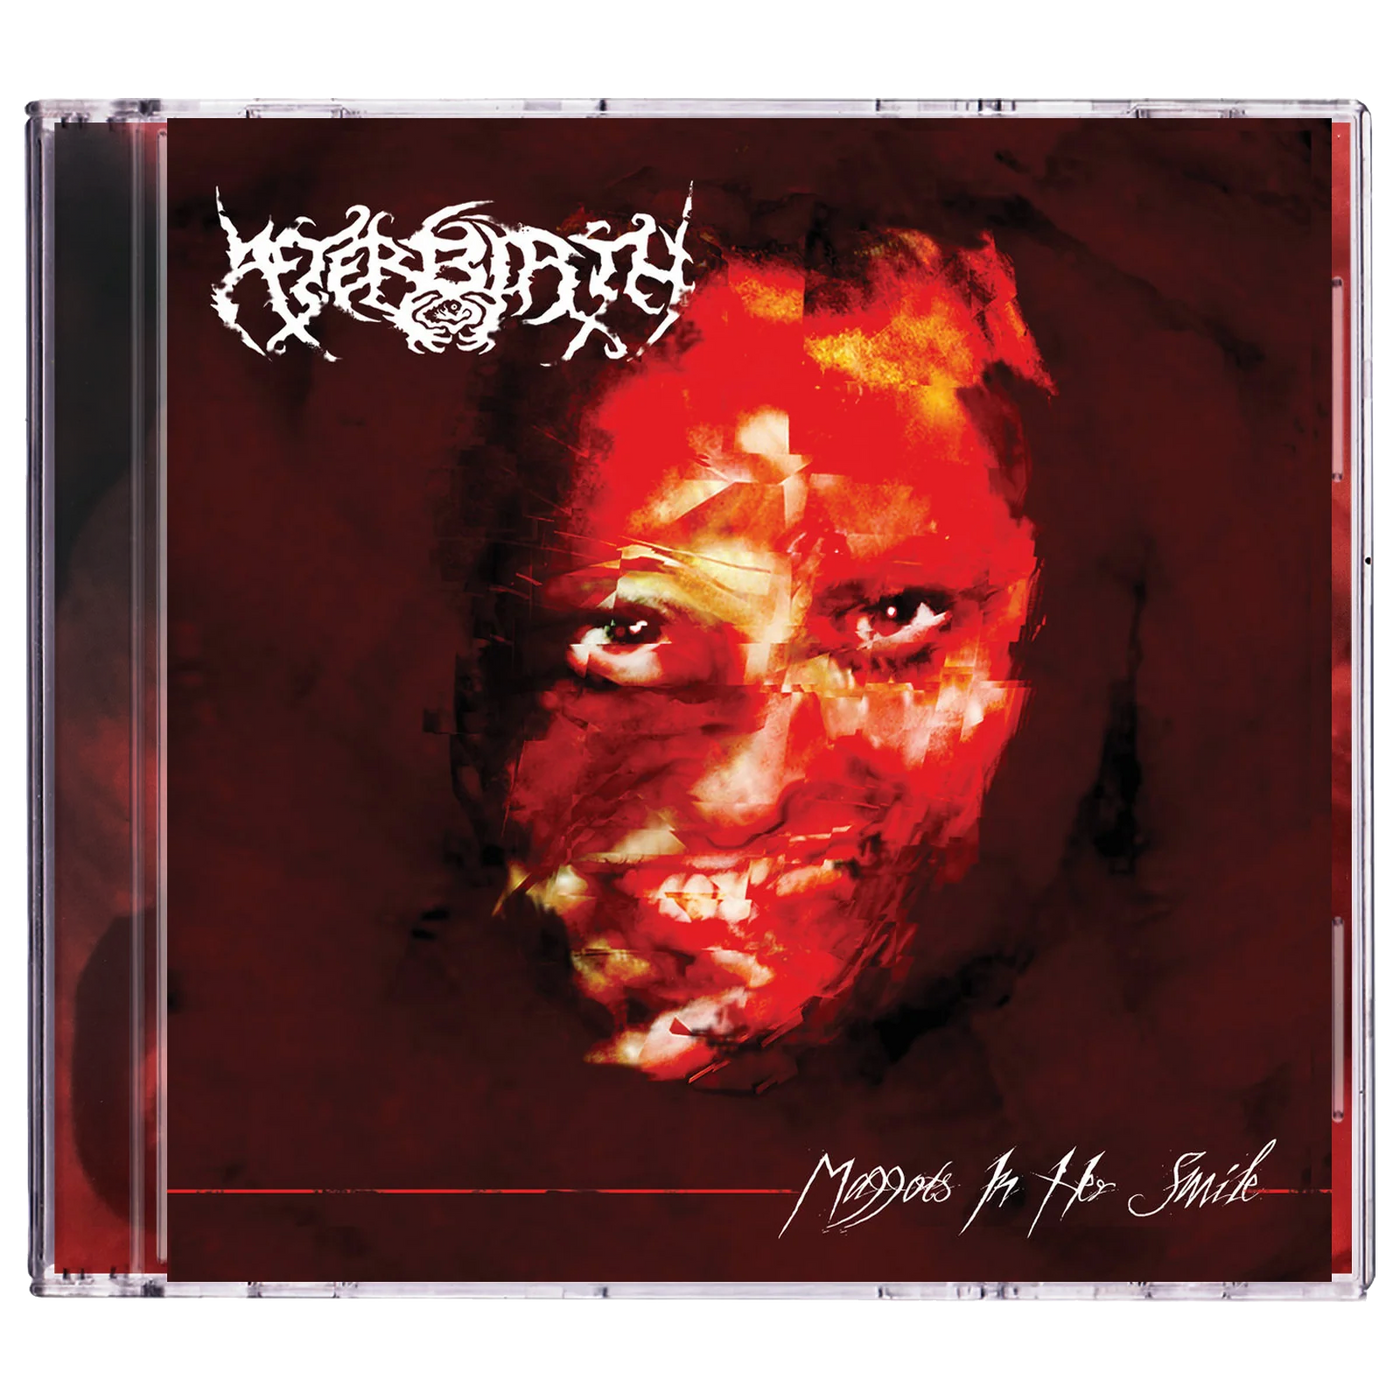 Afterbirth 'Maggots In Her Smile' CD